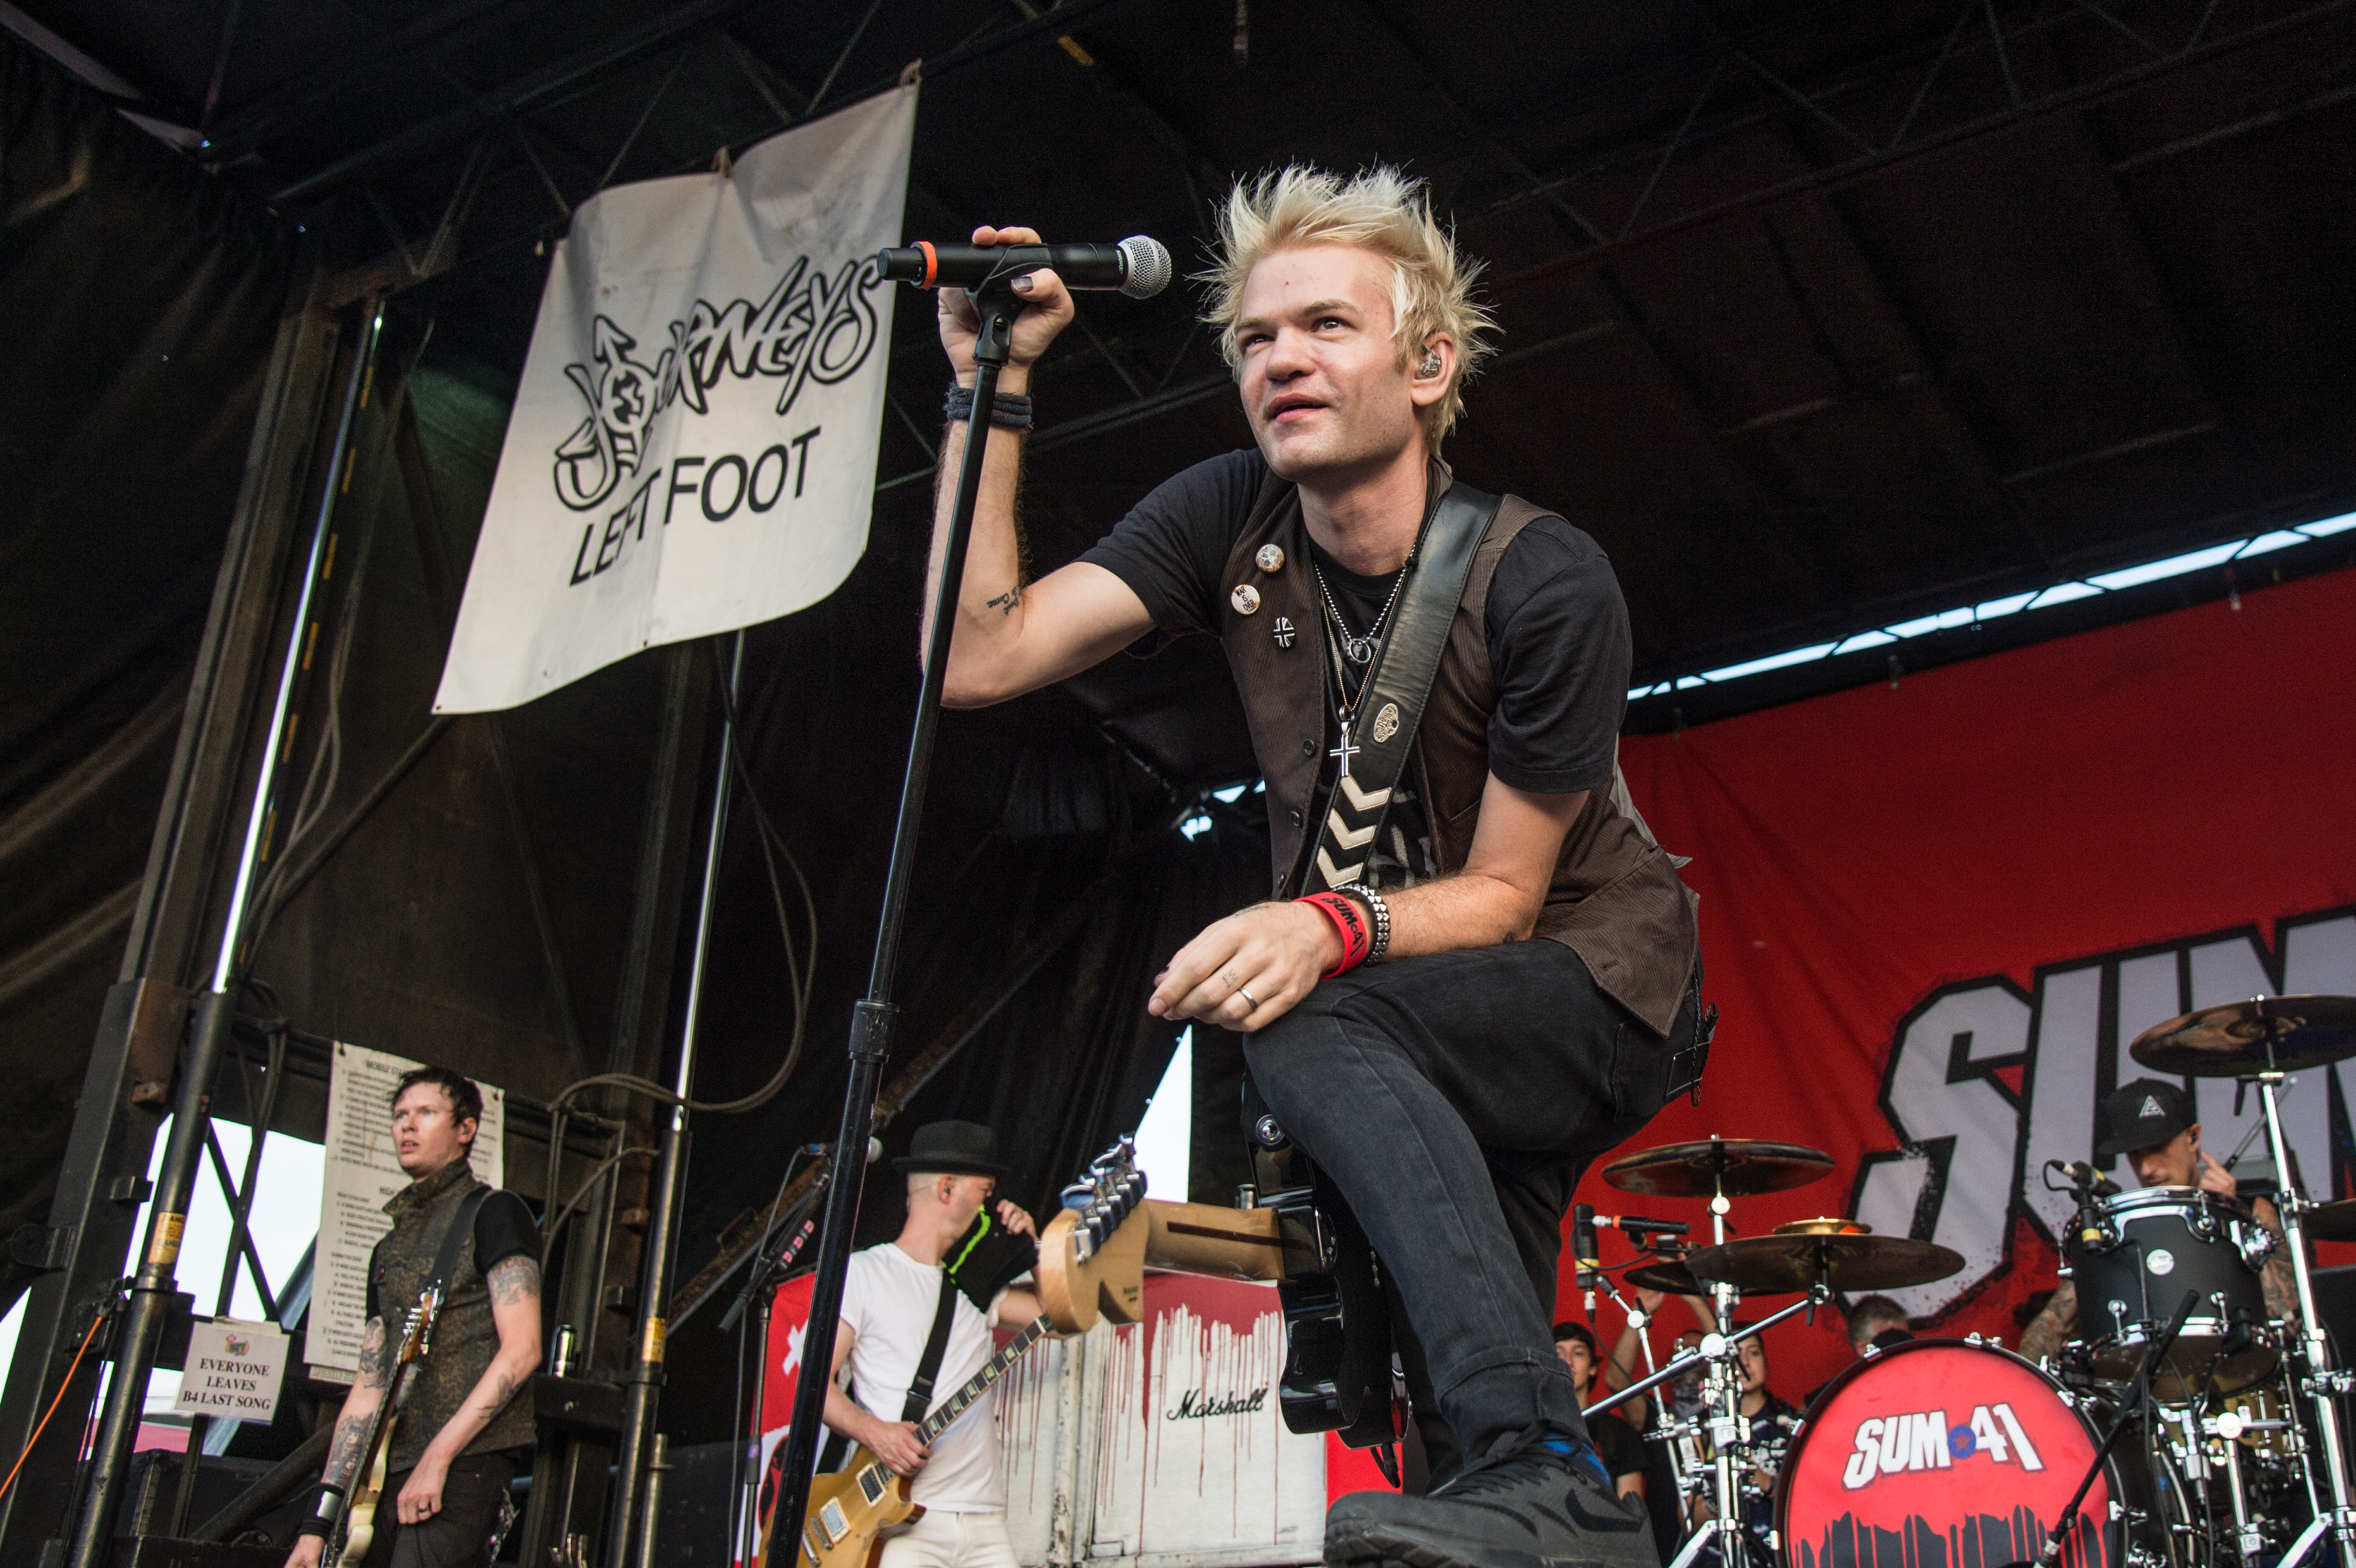 Disbanding,' you say? Sum 41 rockers say they're splitting after new album  and tour, News